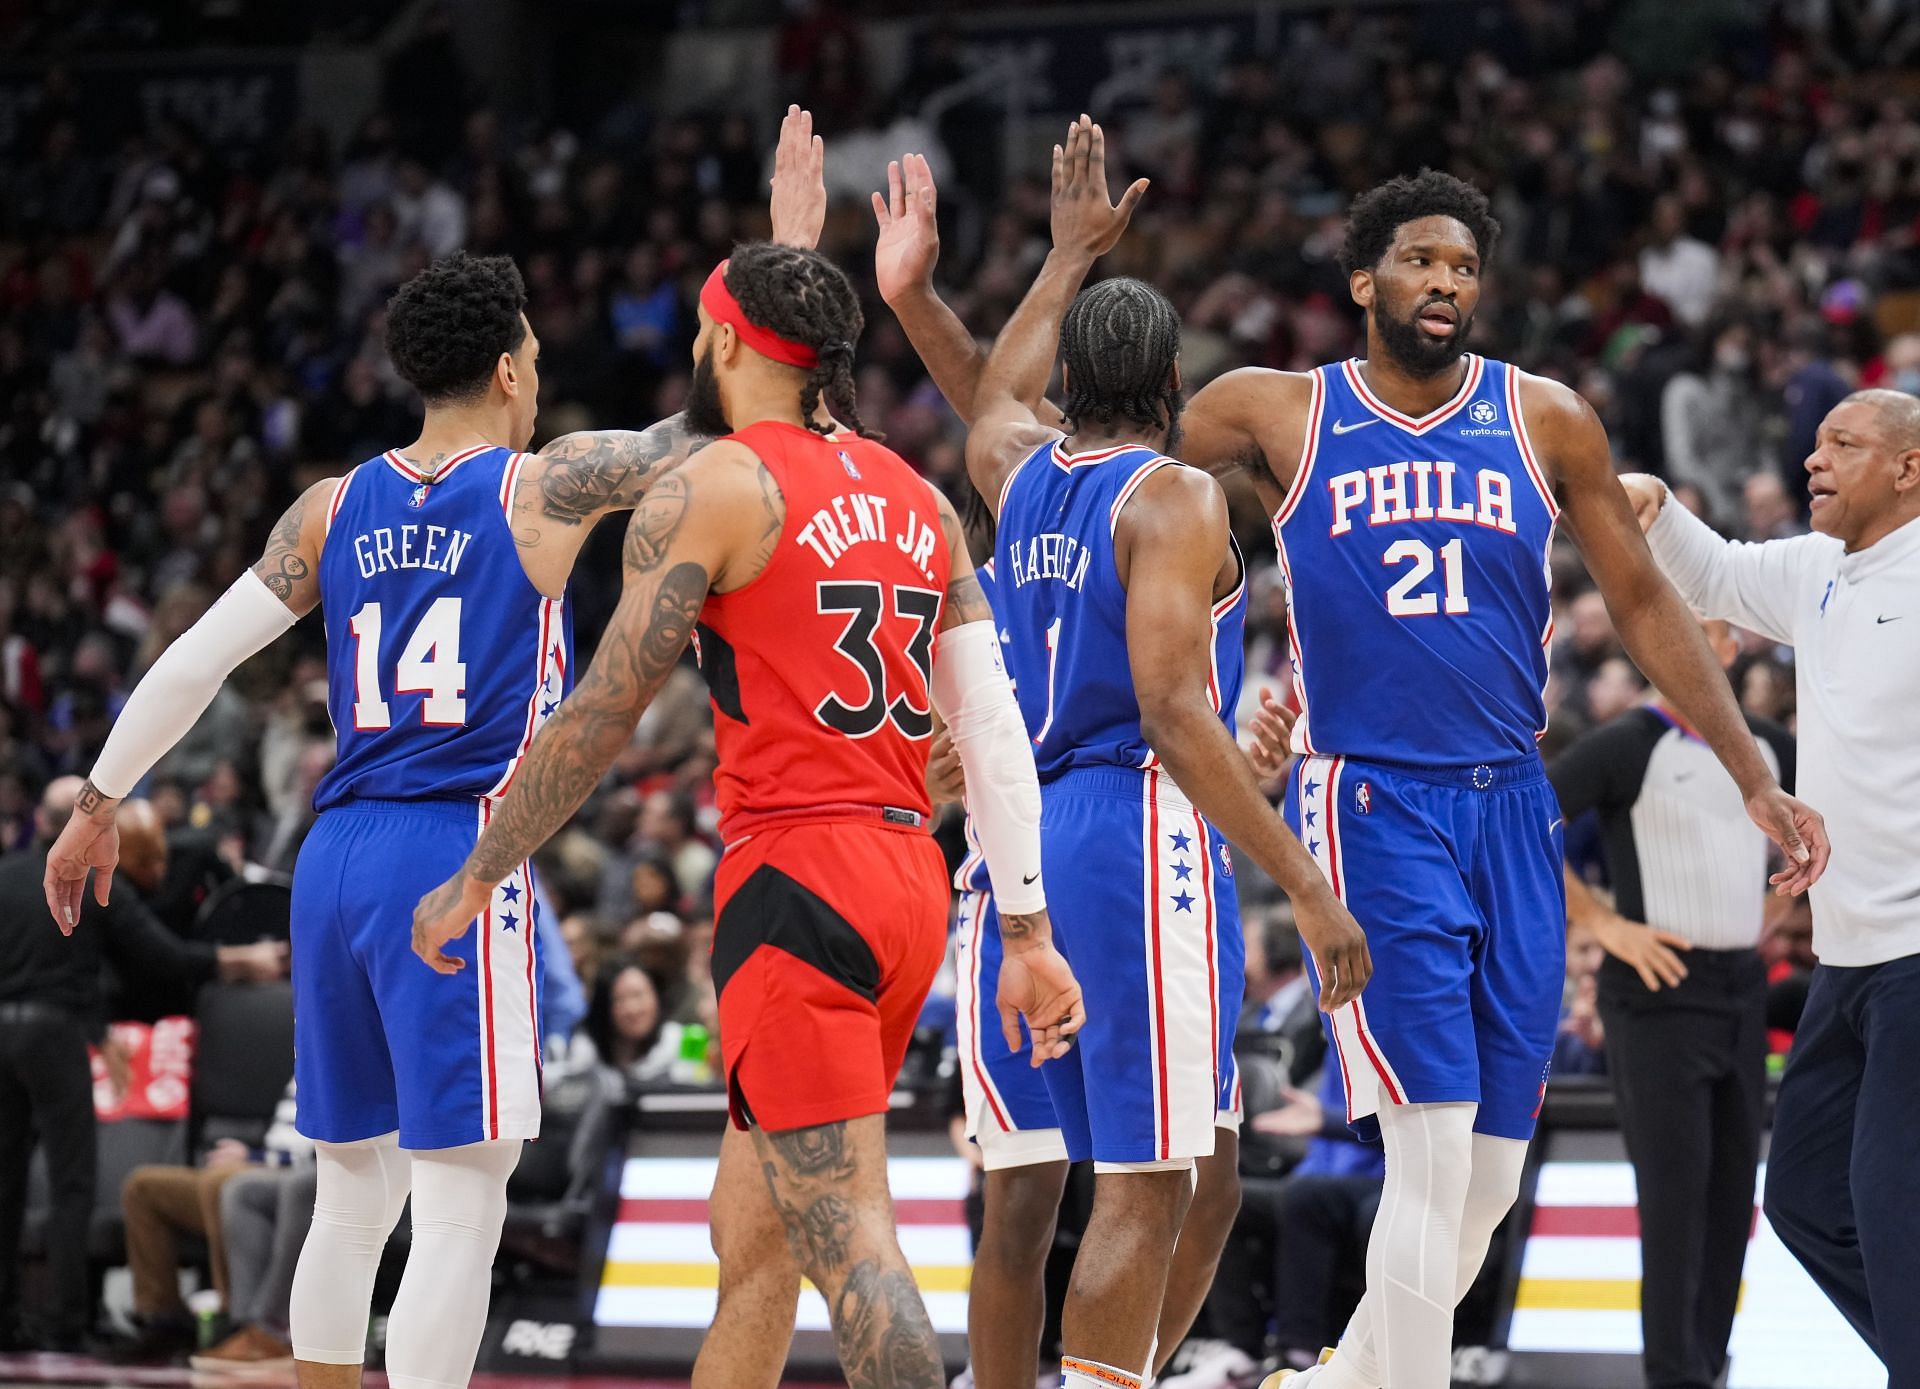 Philadelphia 76ers and Toronto Raptors face off again after playing on April 7th.